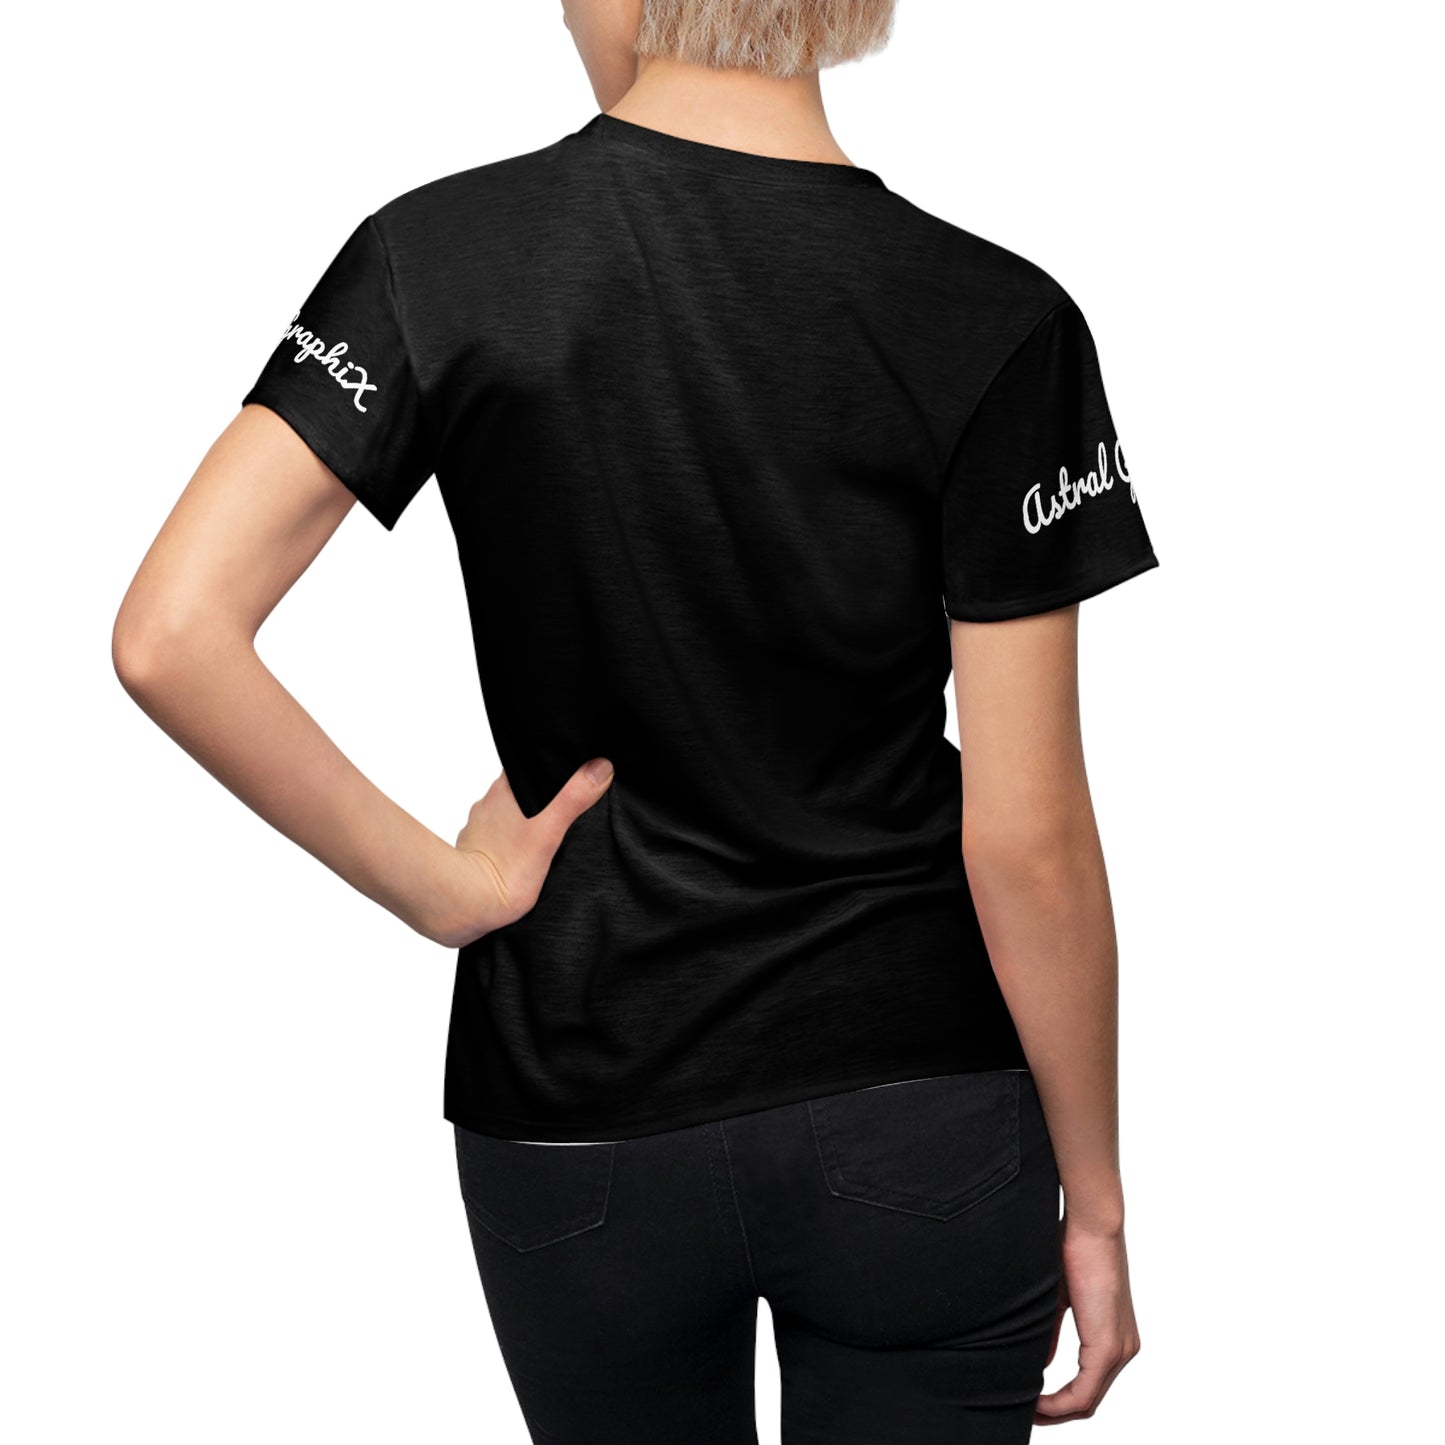 Word Art Collection - Women's Cut & Sew Tee (AOP) - Unlimited in Black